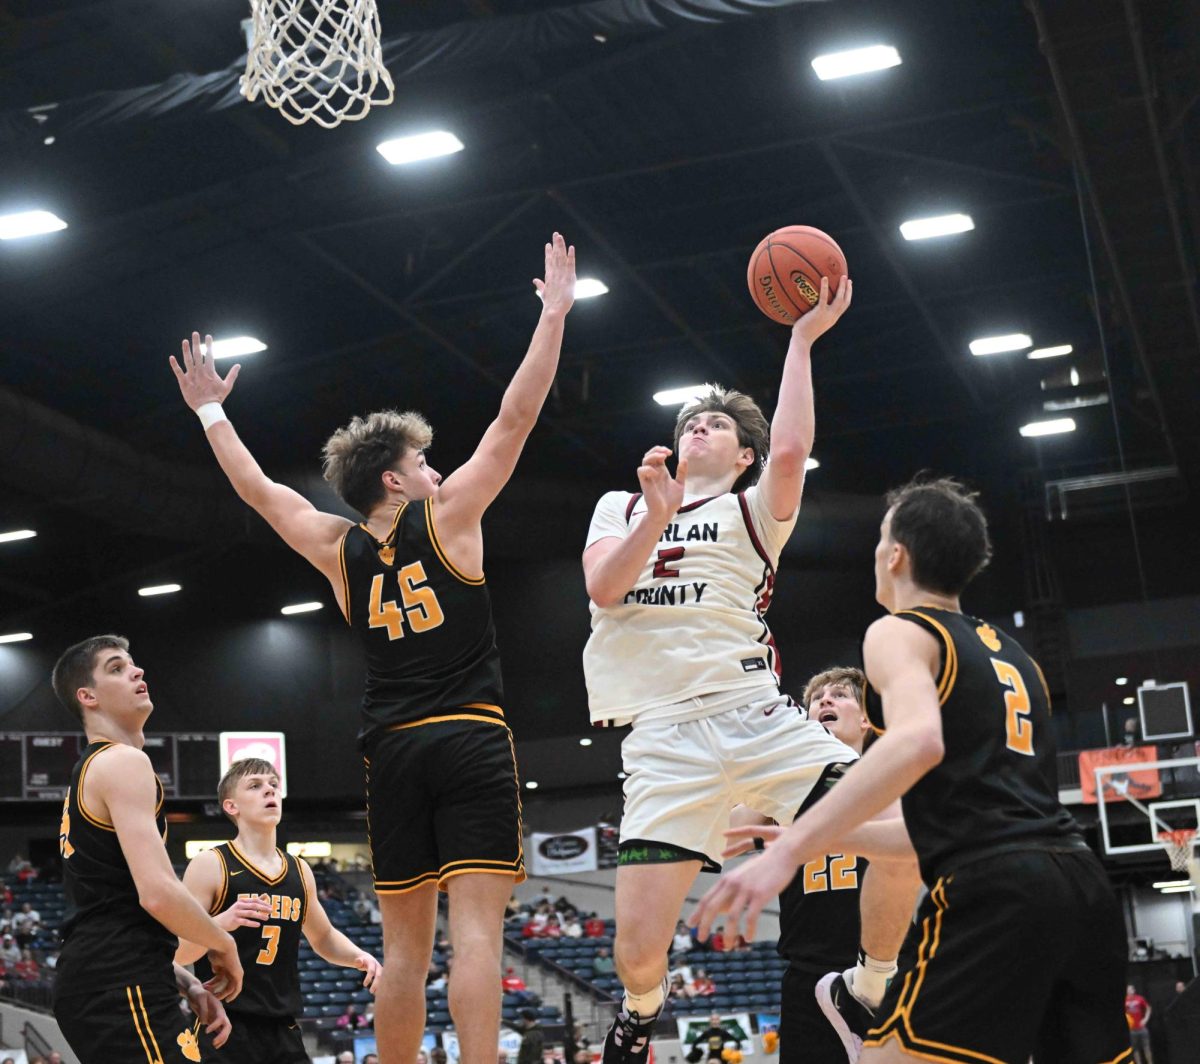 Harlan+County+guard+Trent+Noah+lofted+a+shot+toward+the+basket+as+all+five+Clay+County+defenders+surrounded+him+in+action+from+the+13th+Region+Tournament+on+Saturday.